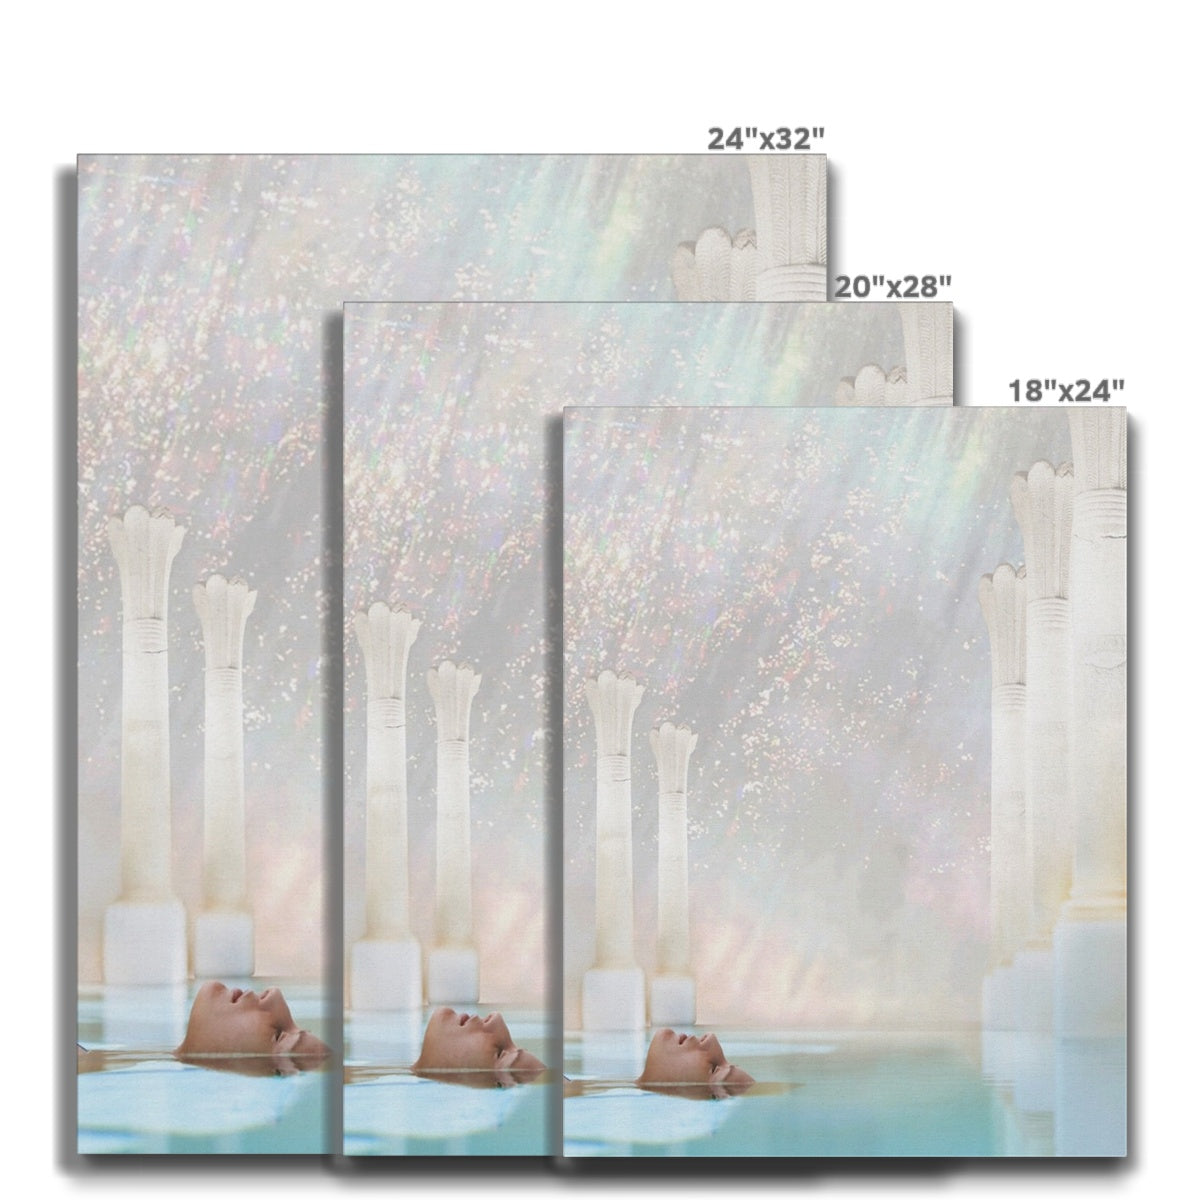 Akashic Waters Canvas - Starseed Designs Inc.